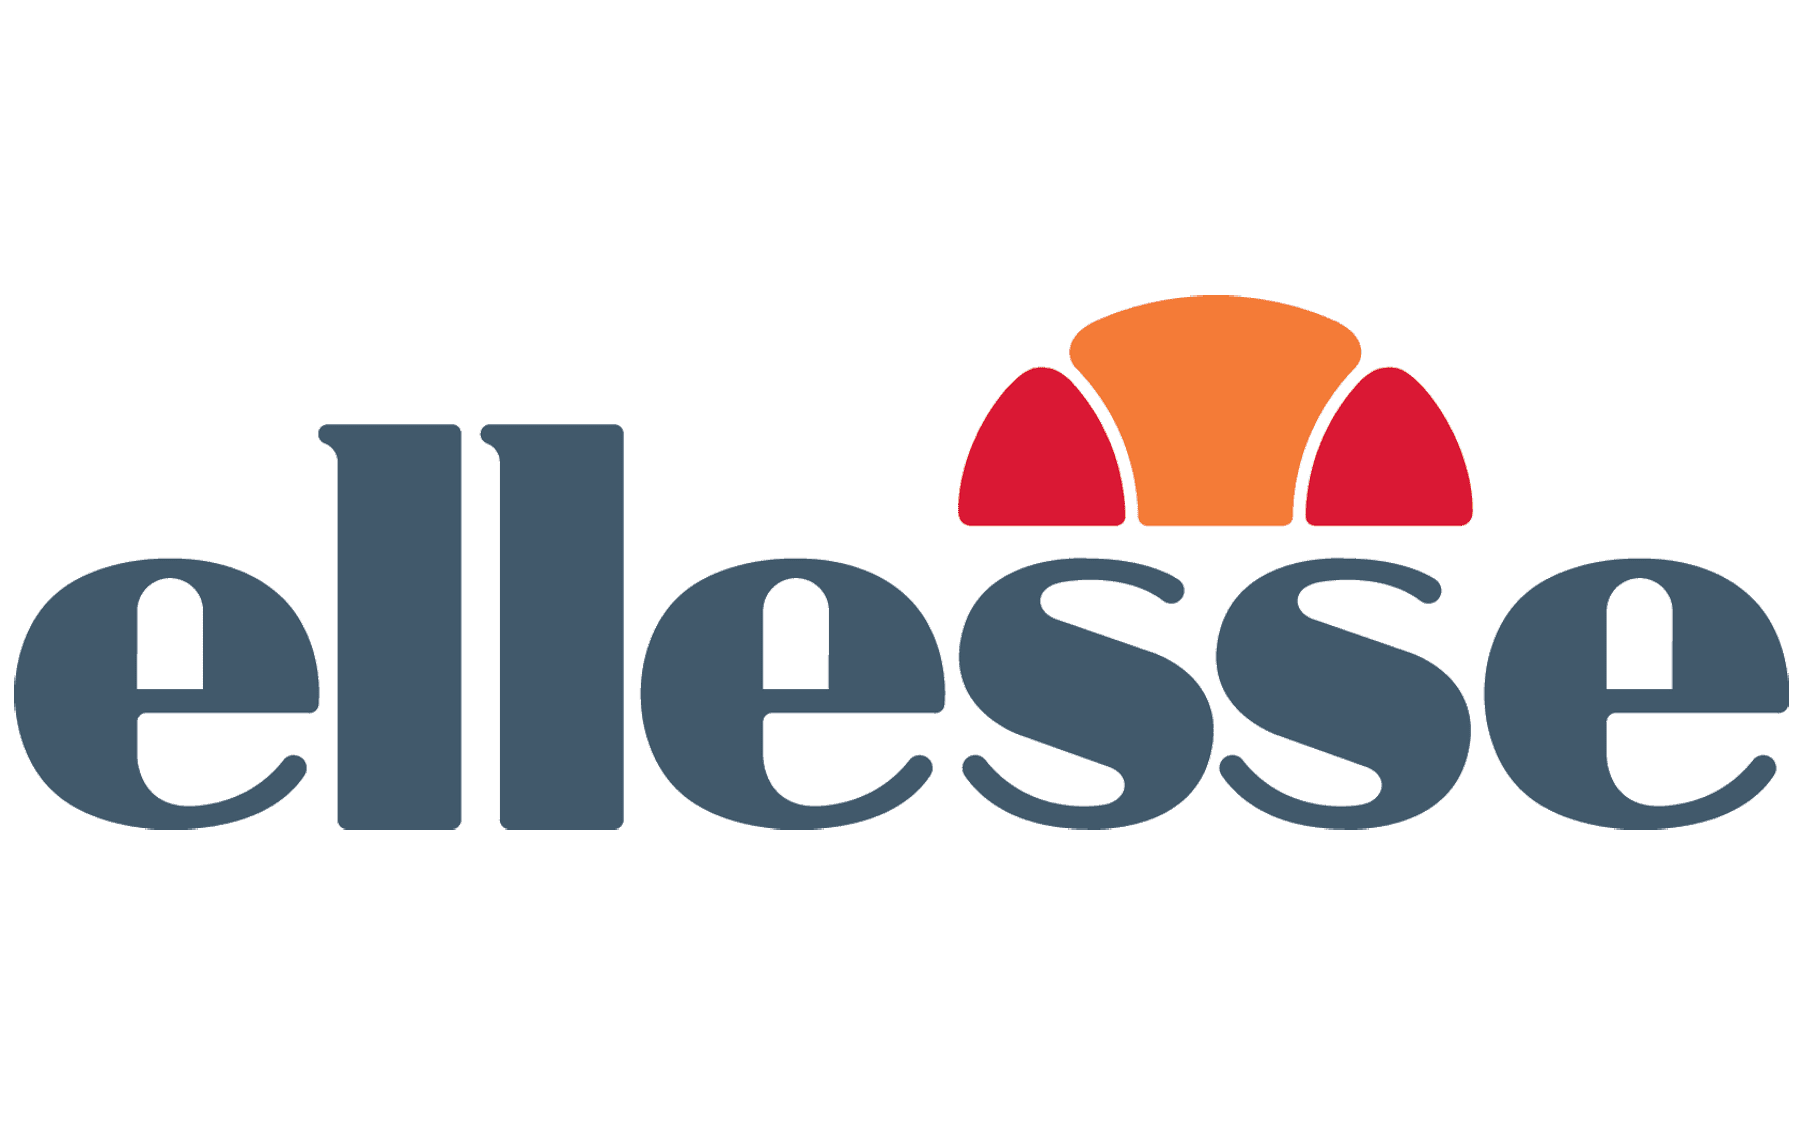 ellesse meaning of name